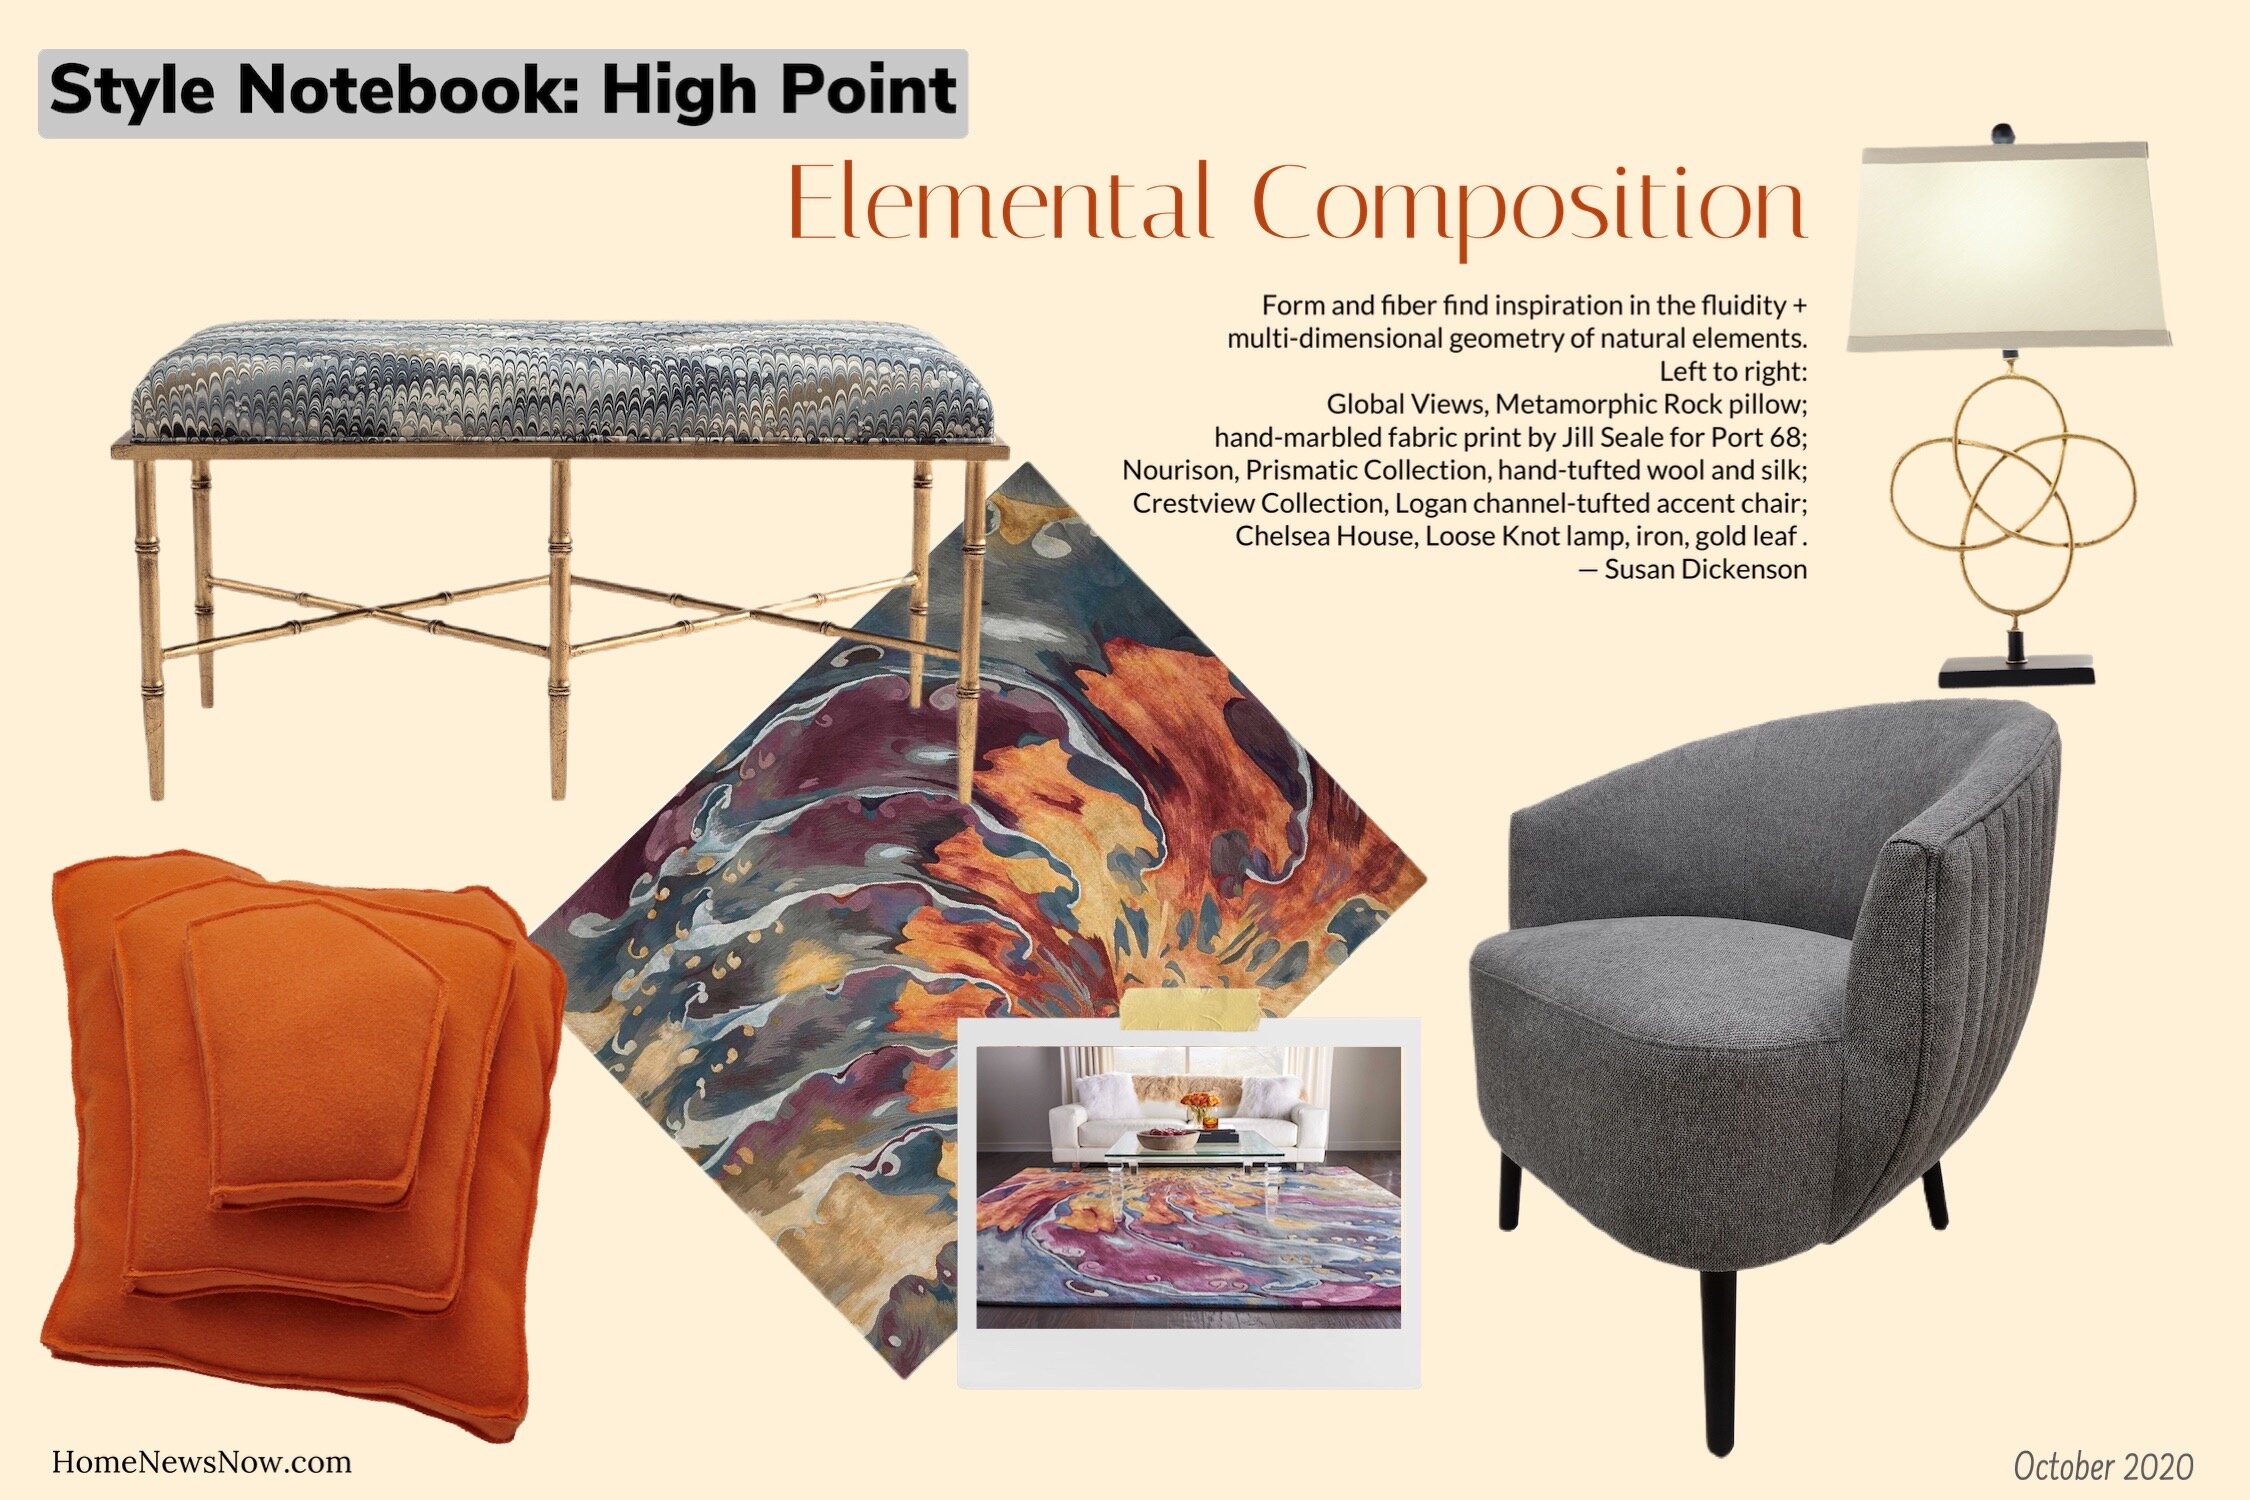 Left to right: Global Views, Metamorphic Rock pillow; Jill Seale for Port 68; Nourison, Prismatic Collection, hand-tufted wool and silk; Crestview Collection, Logan accent chair; Chelsea House, Loose Knot lamp.